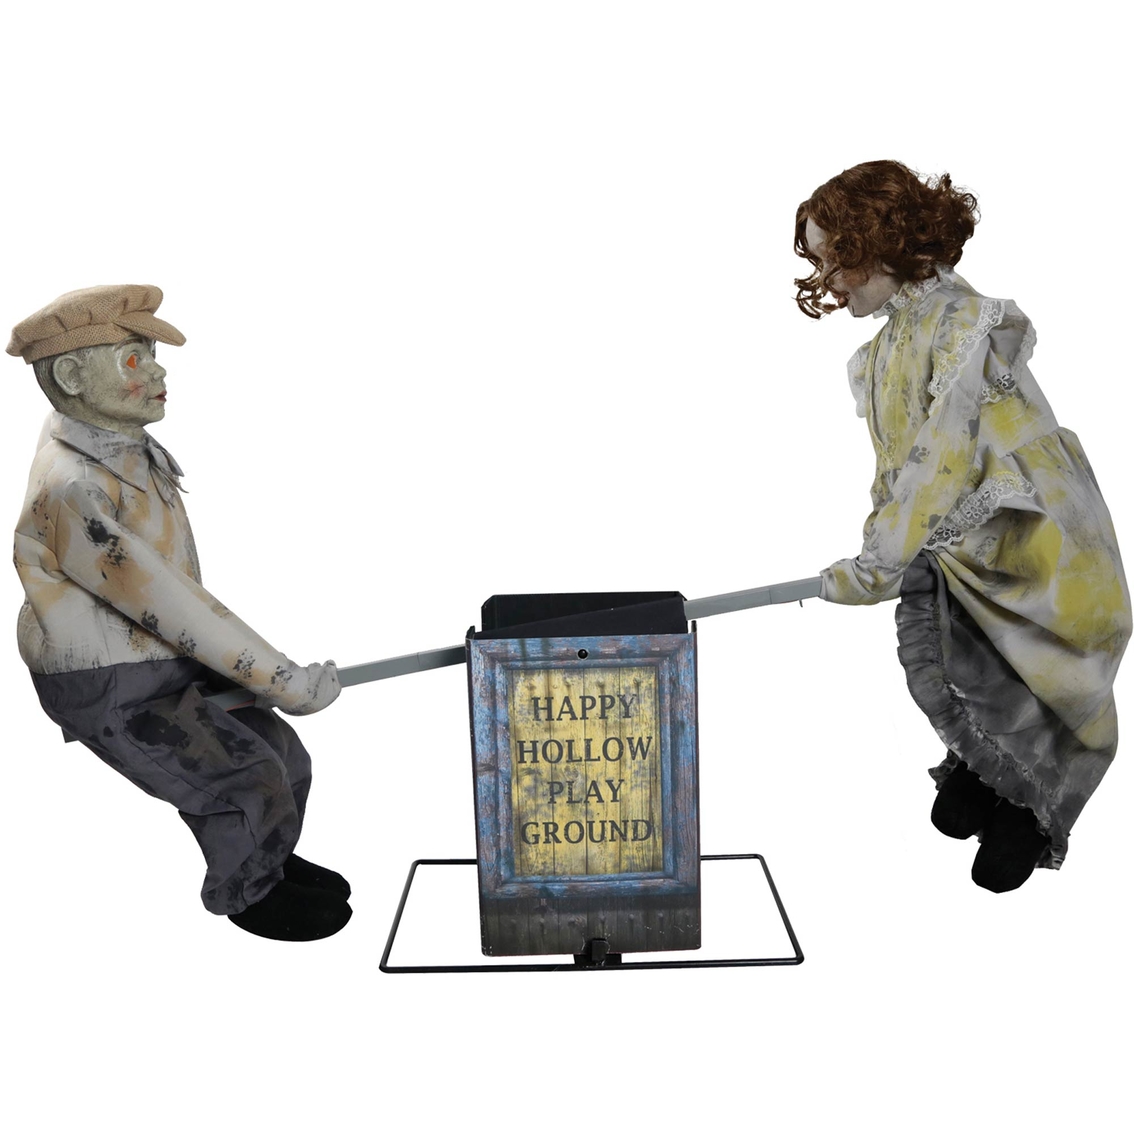 Morris Costumes See Saw Dolls Playground Prop